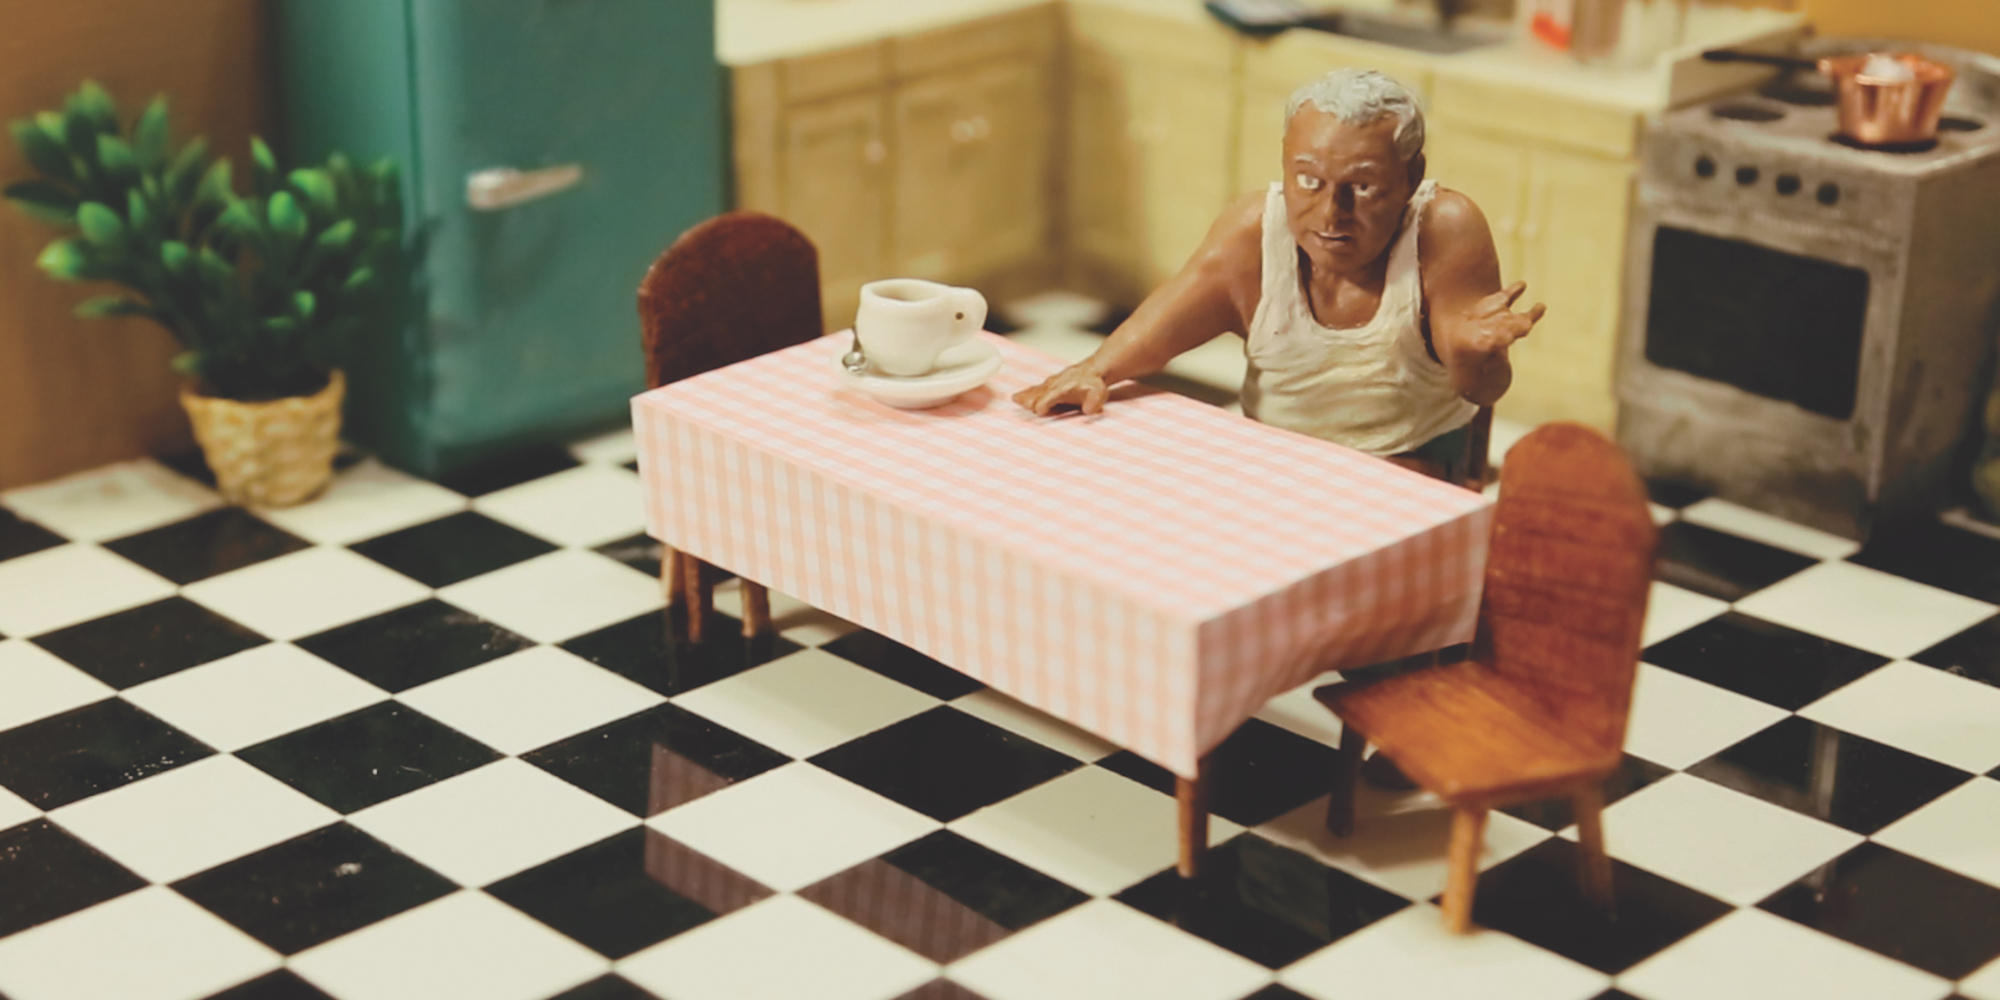 Figurine of man in white tank shirt sitting in a model of a kitchen with checkerboard floor